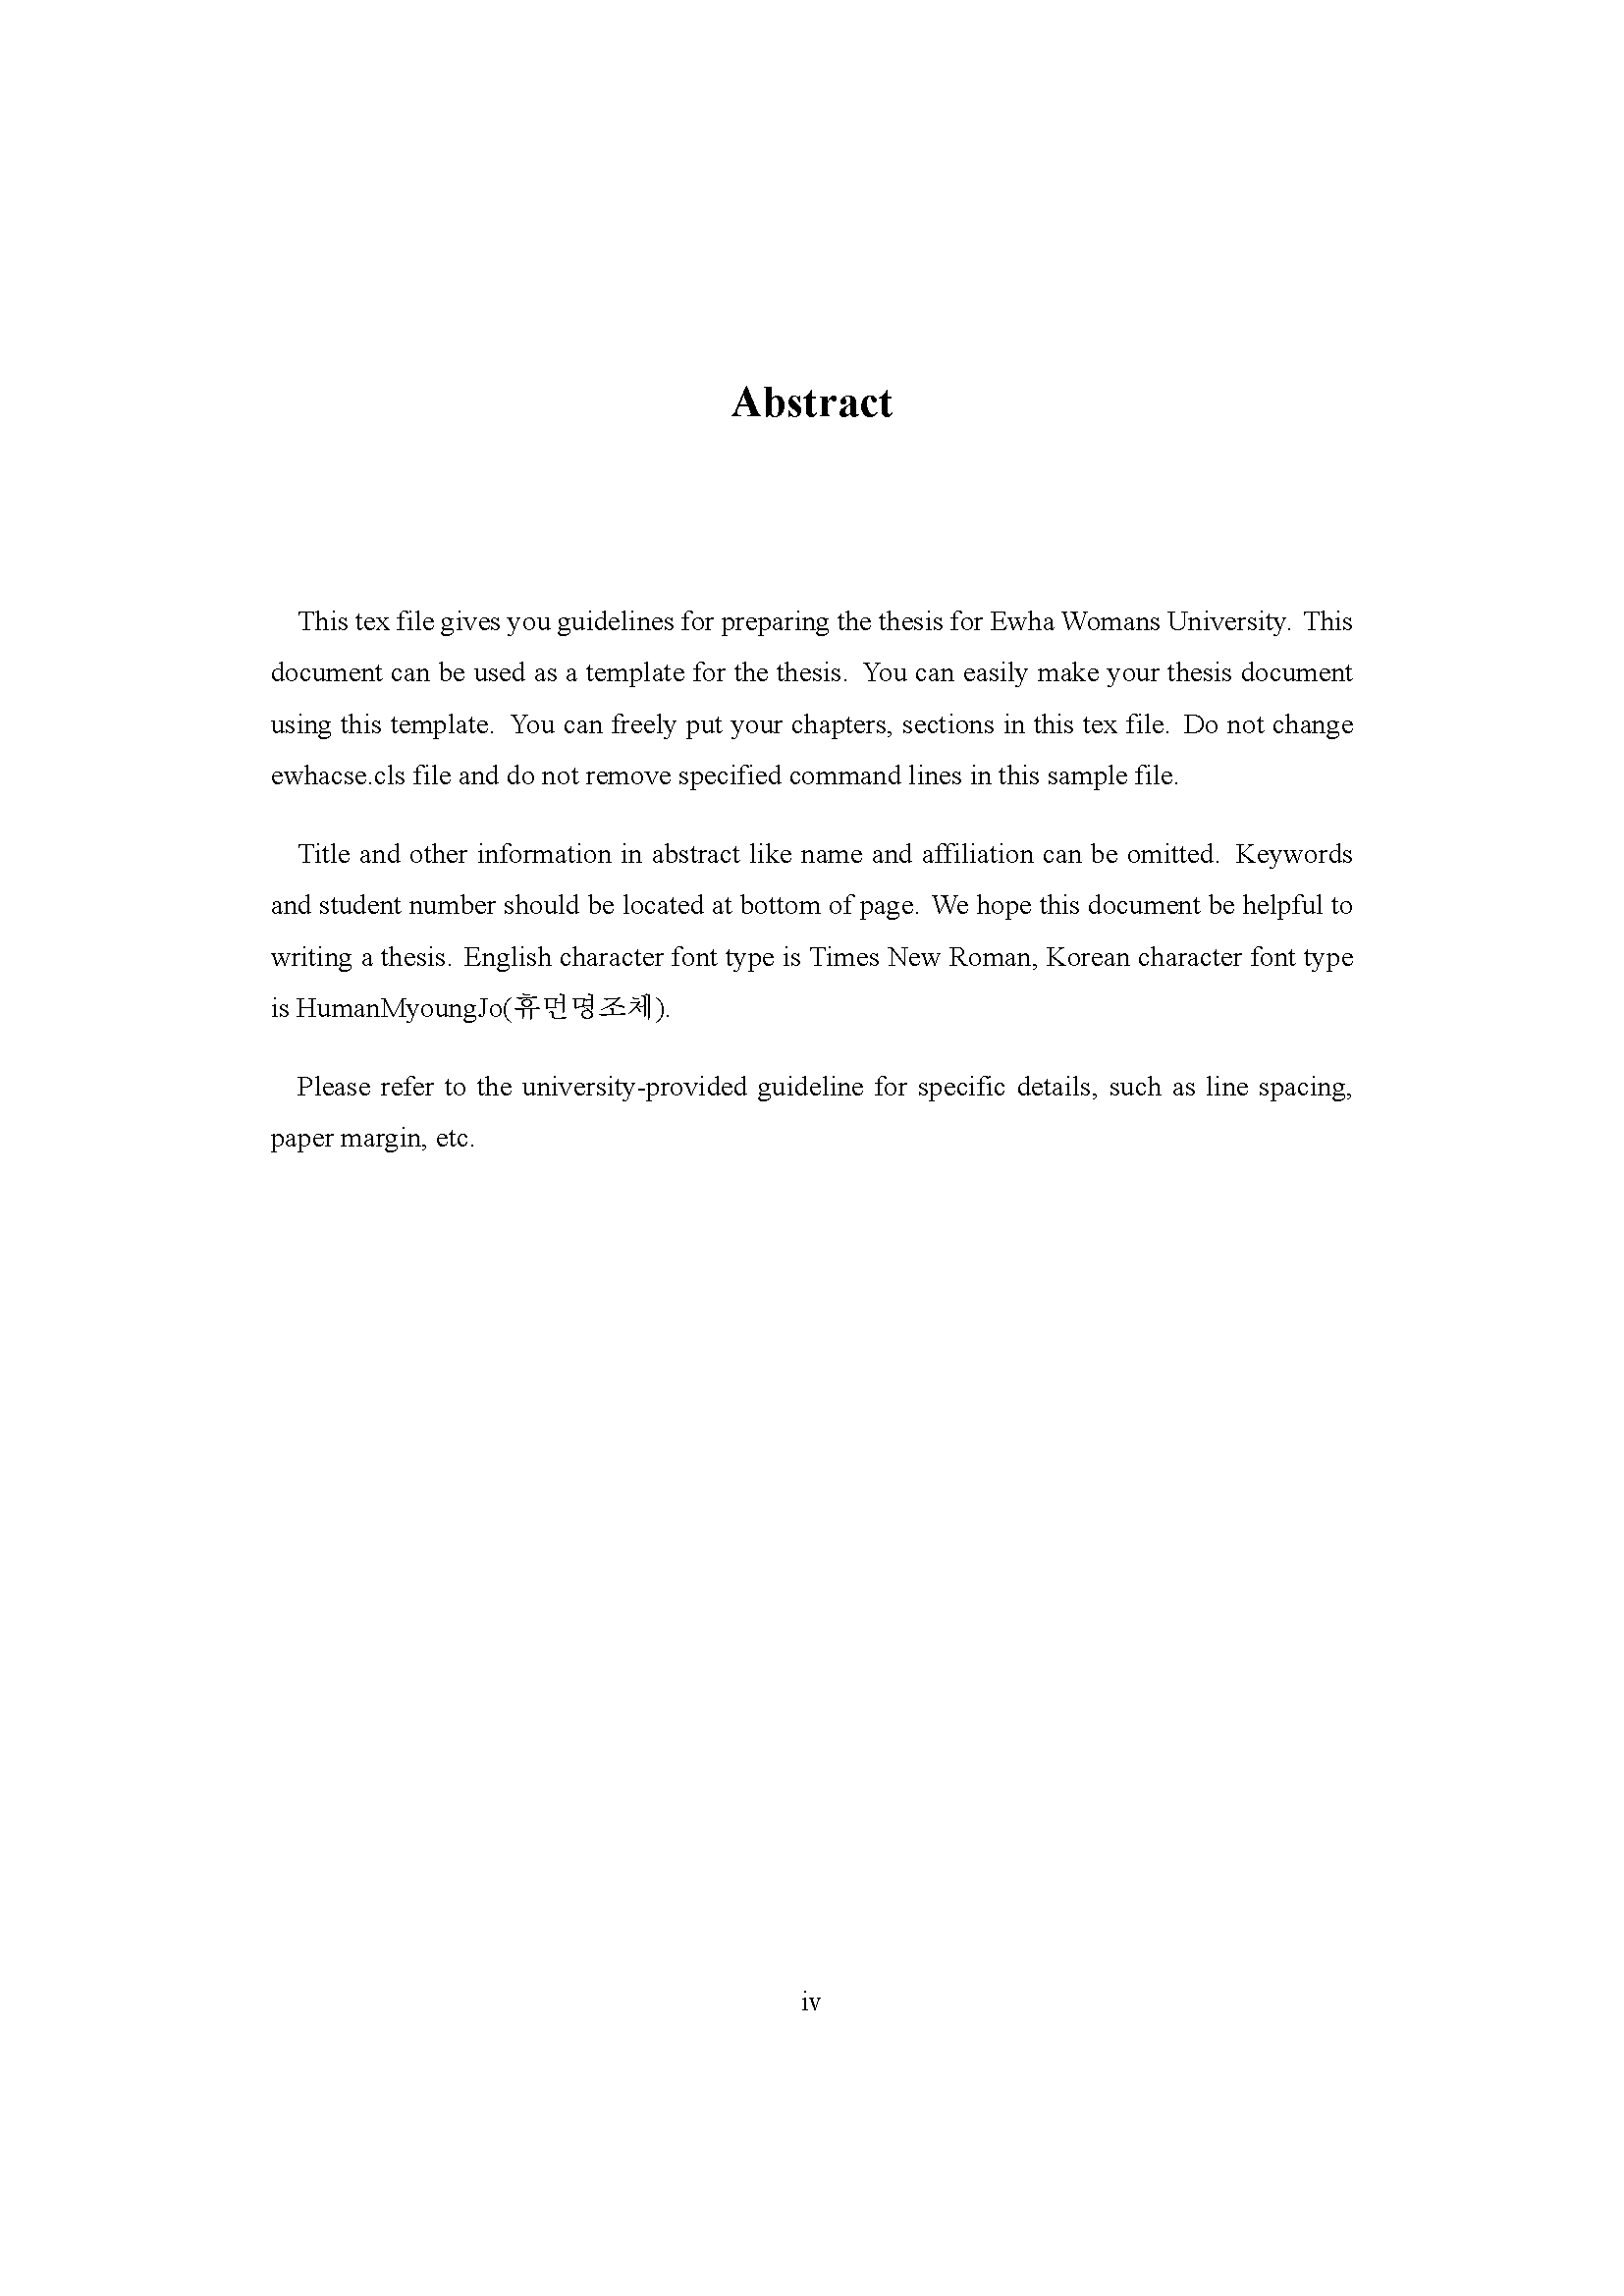 ewha_thesis_template_page_07.png